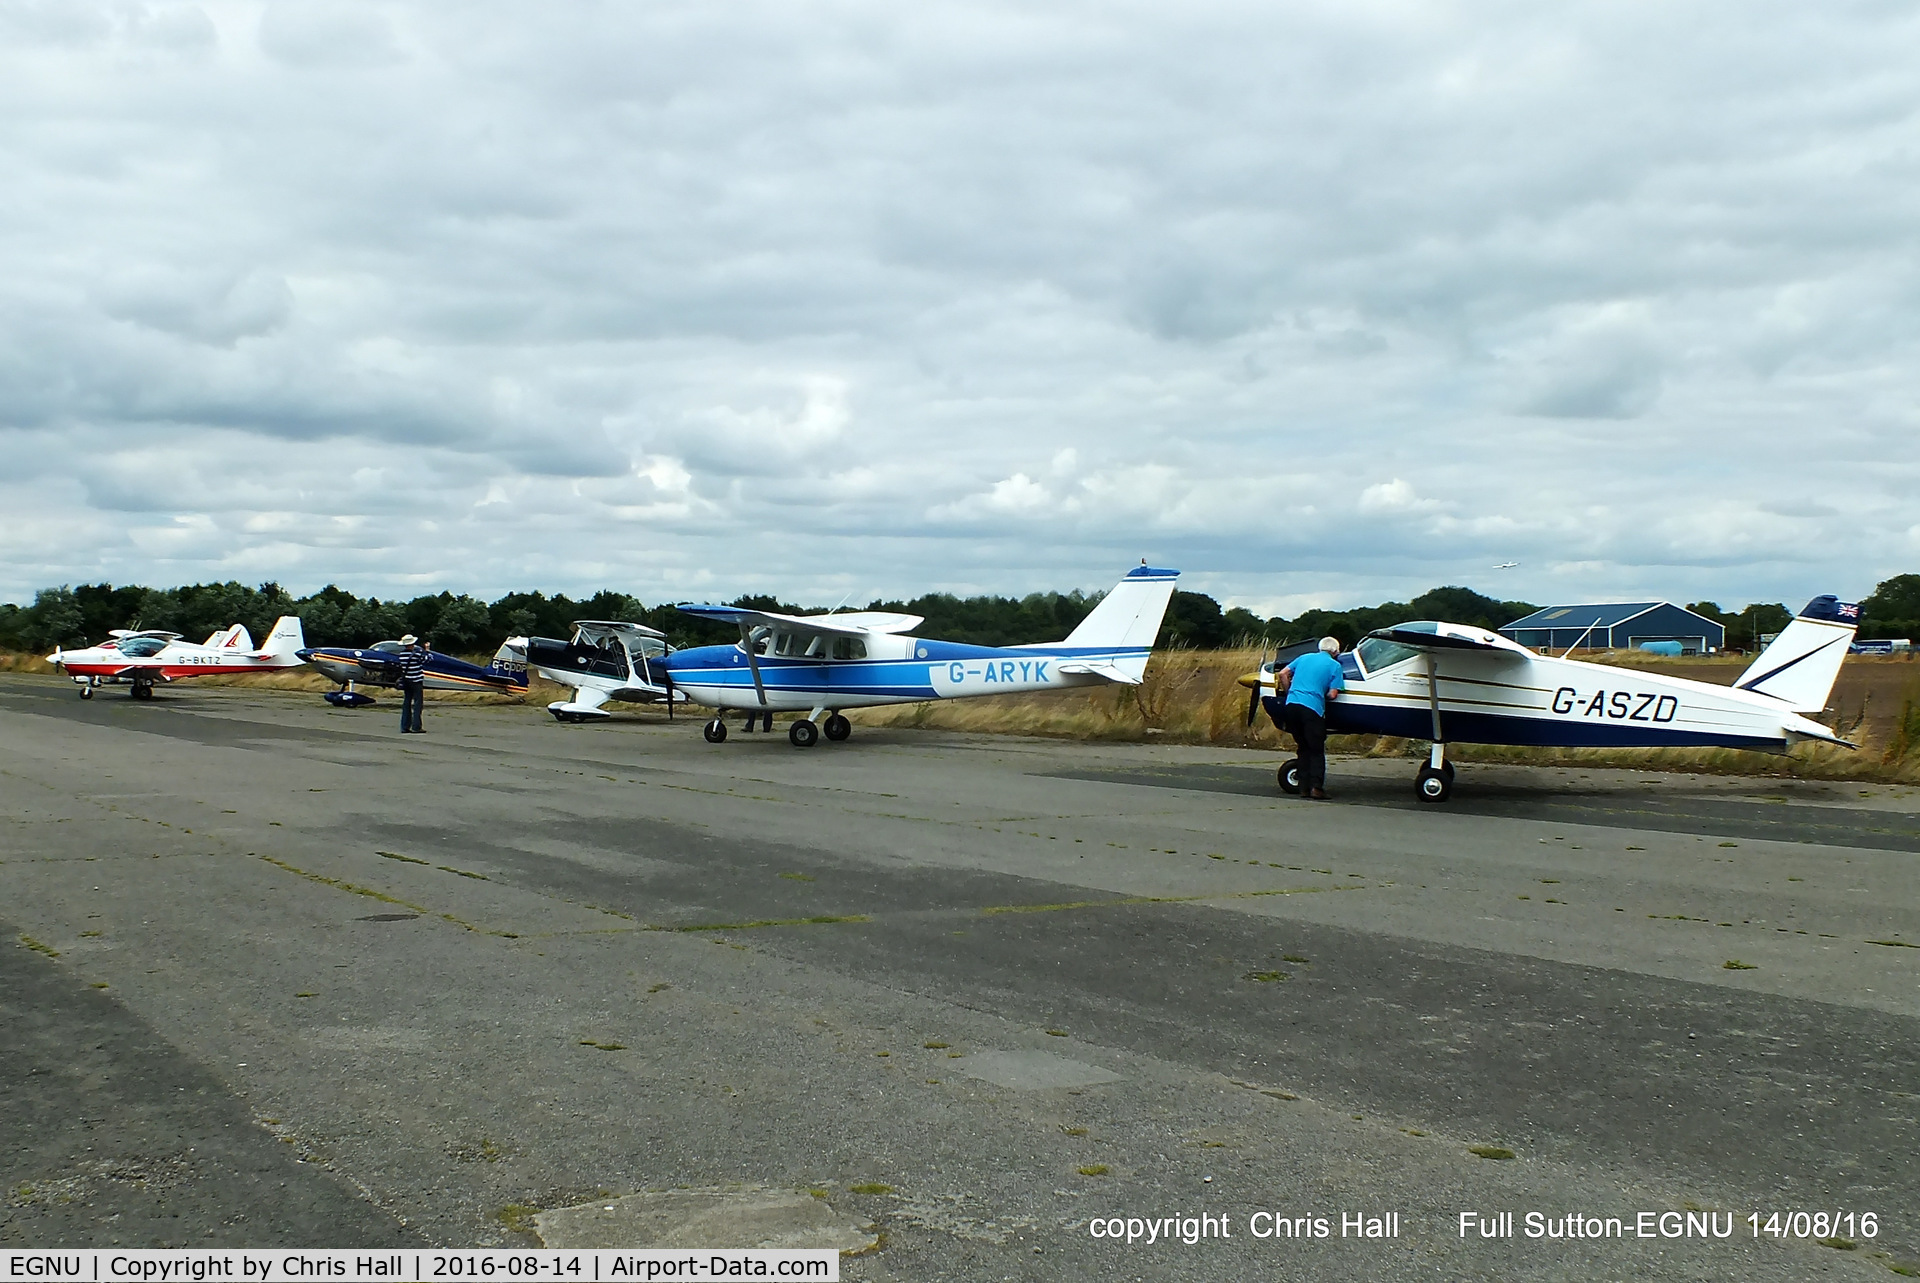 Full Sutton Airfield Airport, York, England United Kingdom (EGNU) - LAA Vale of York Strut fly-in, Full Sutton